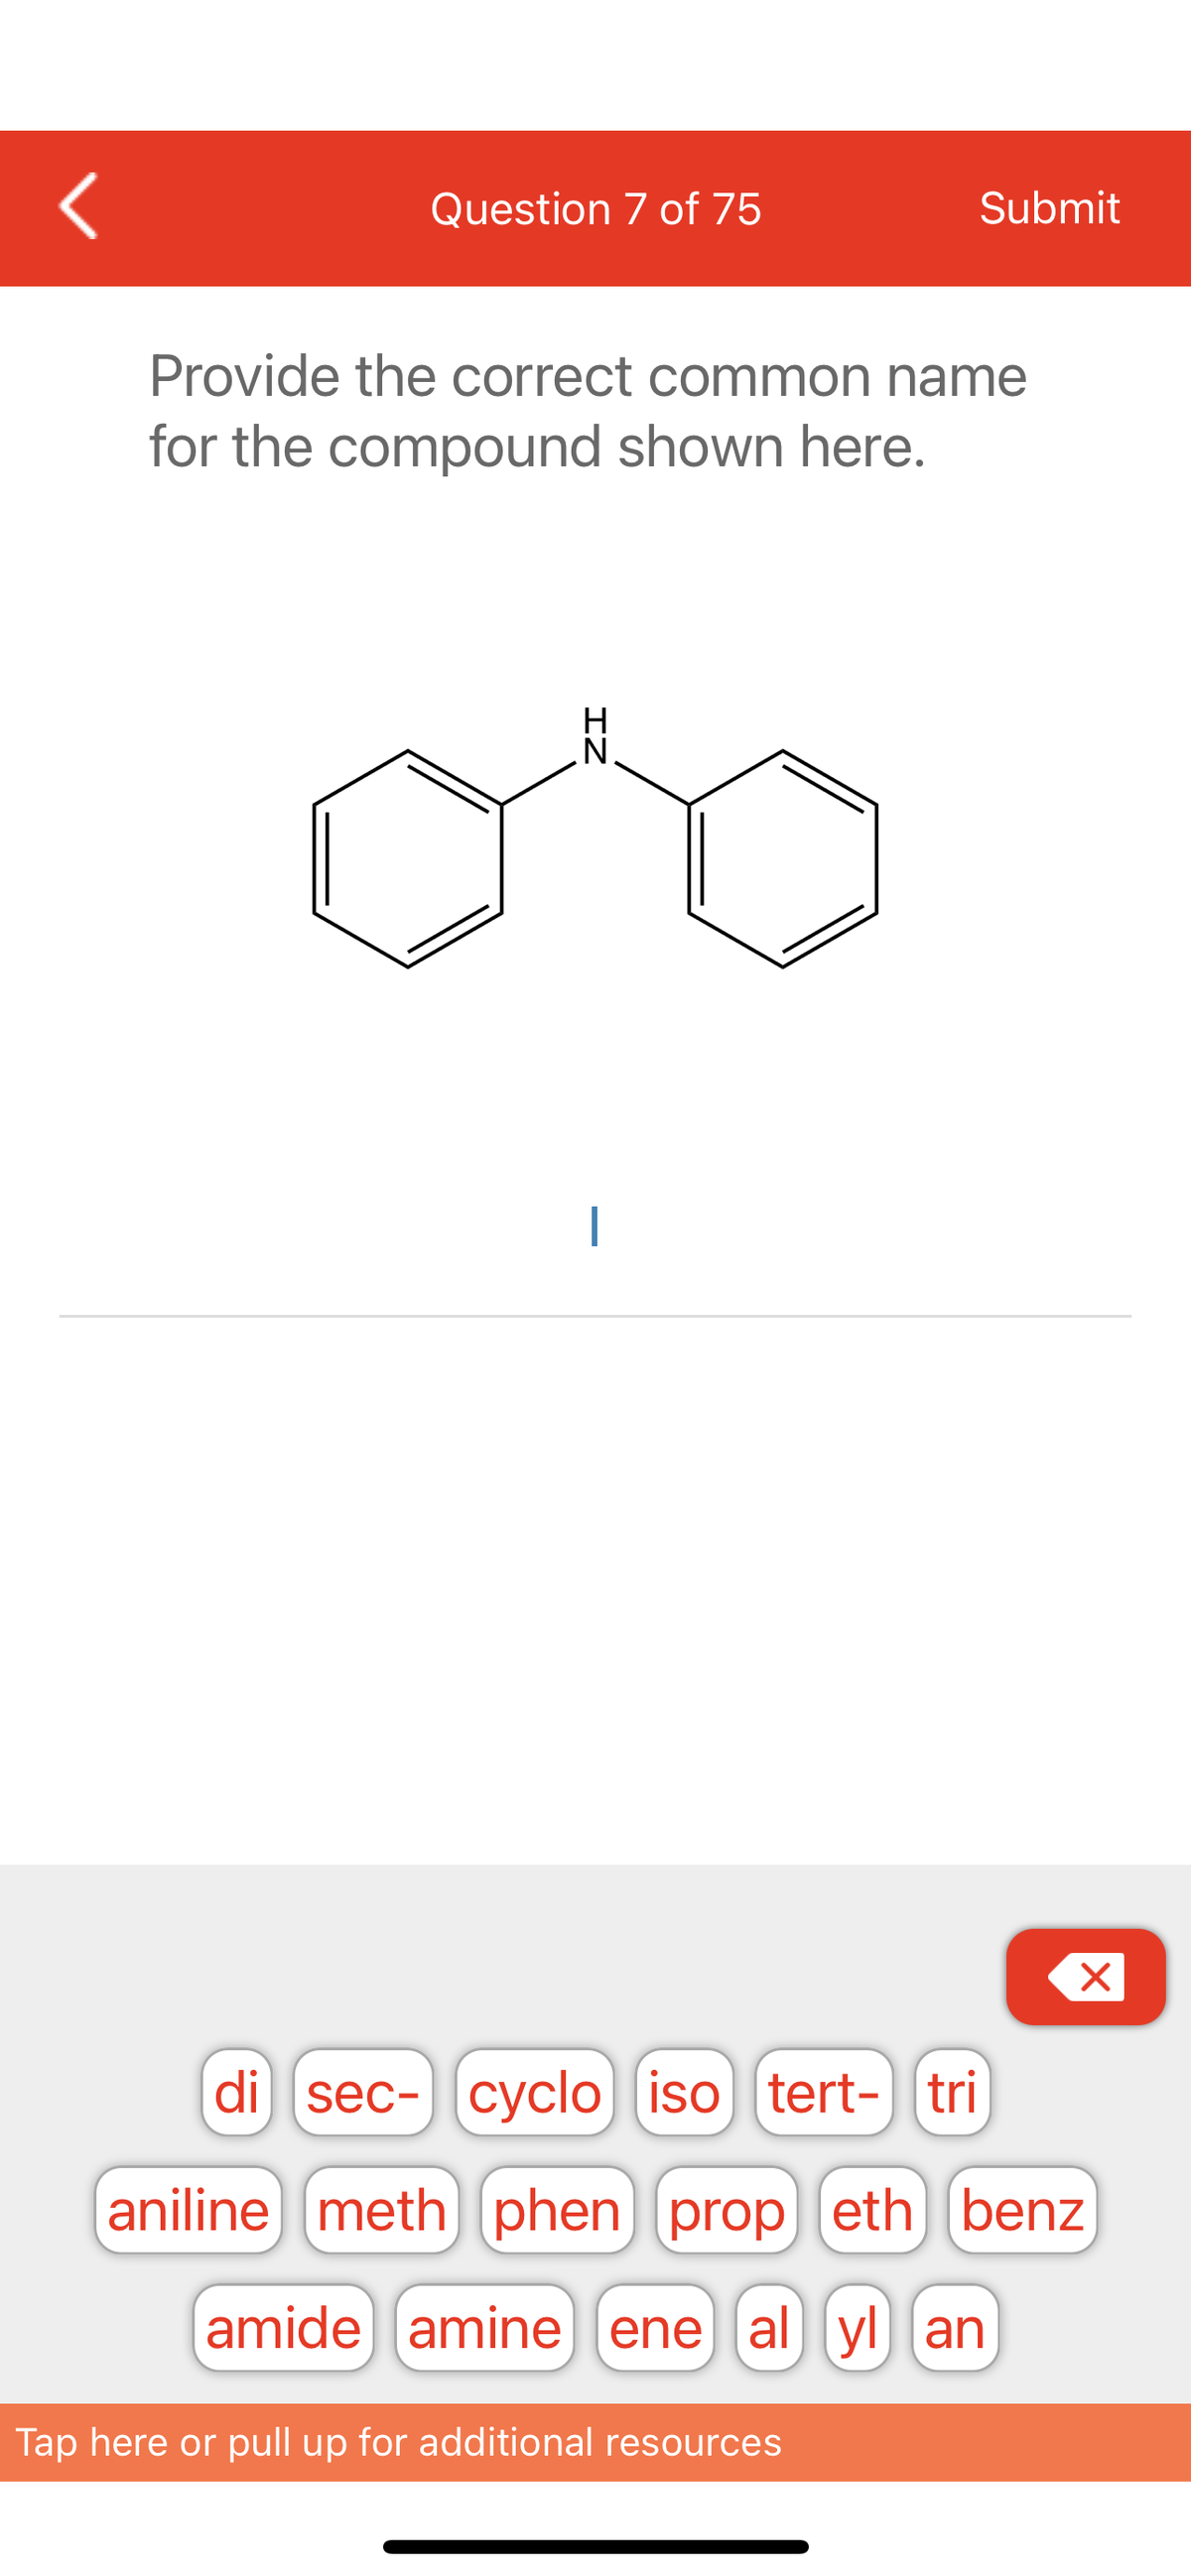 <
Question 7 of 75
Provide the correct common name
for the compound shown here.
N
Submit
Tap here or pull up for additional resources
X
di sec- cyclo] iso [tert- tri
aniline meth) phen) prop (eth benz
amide amine ene al yl an